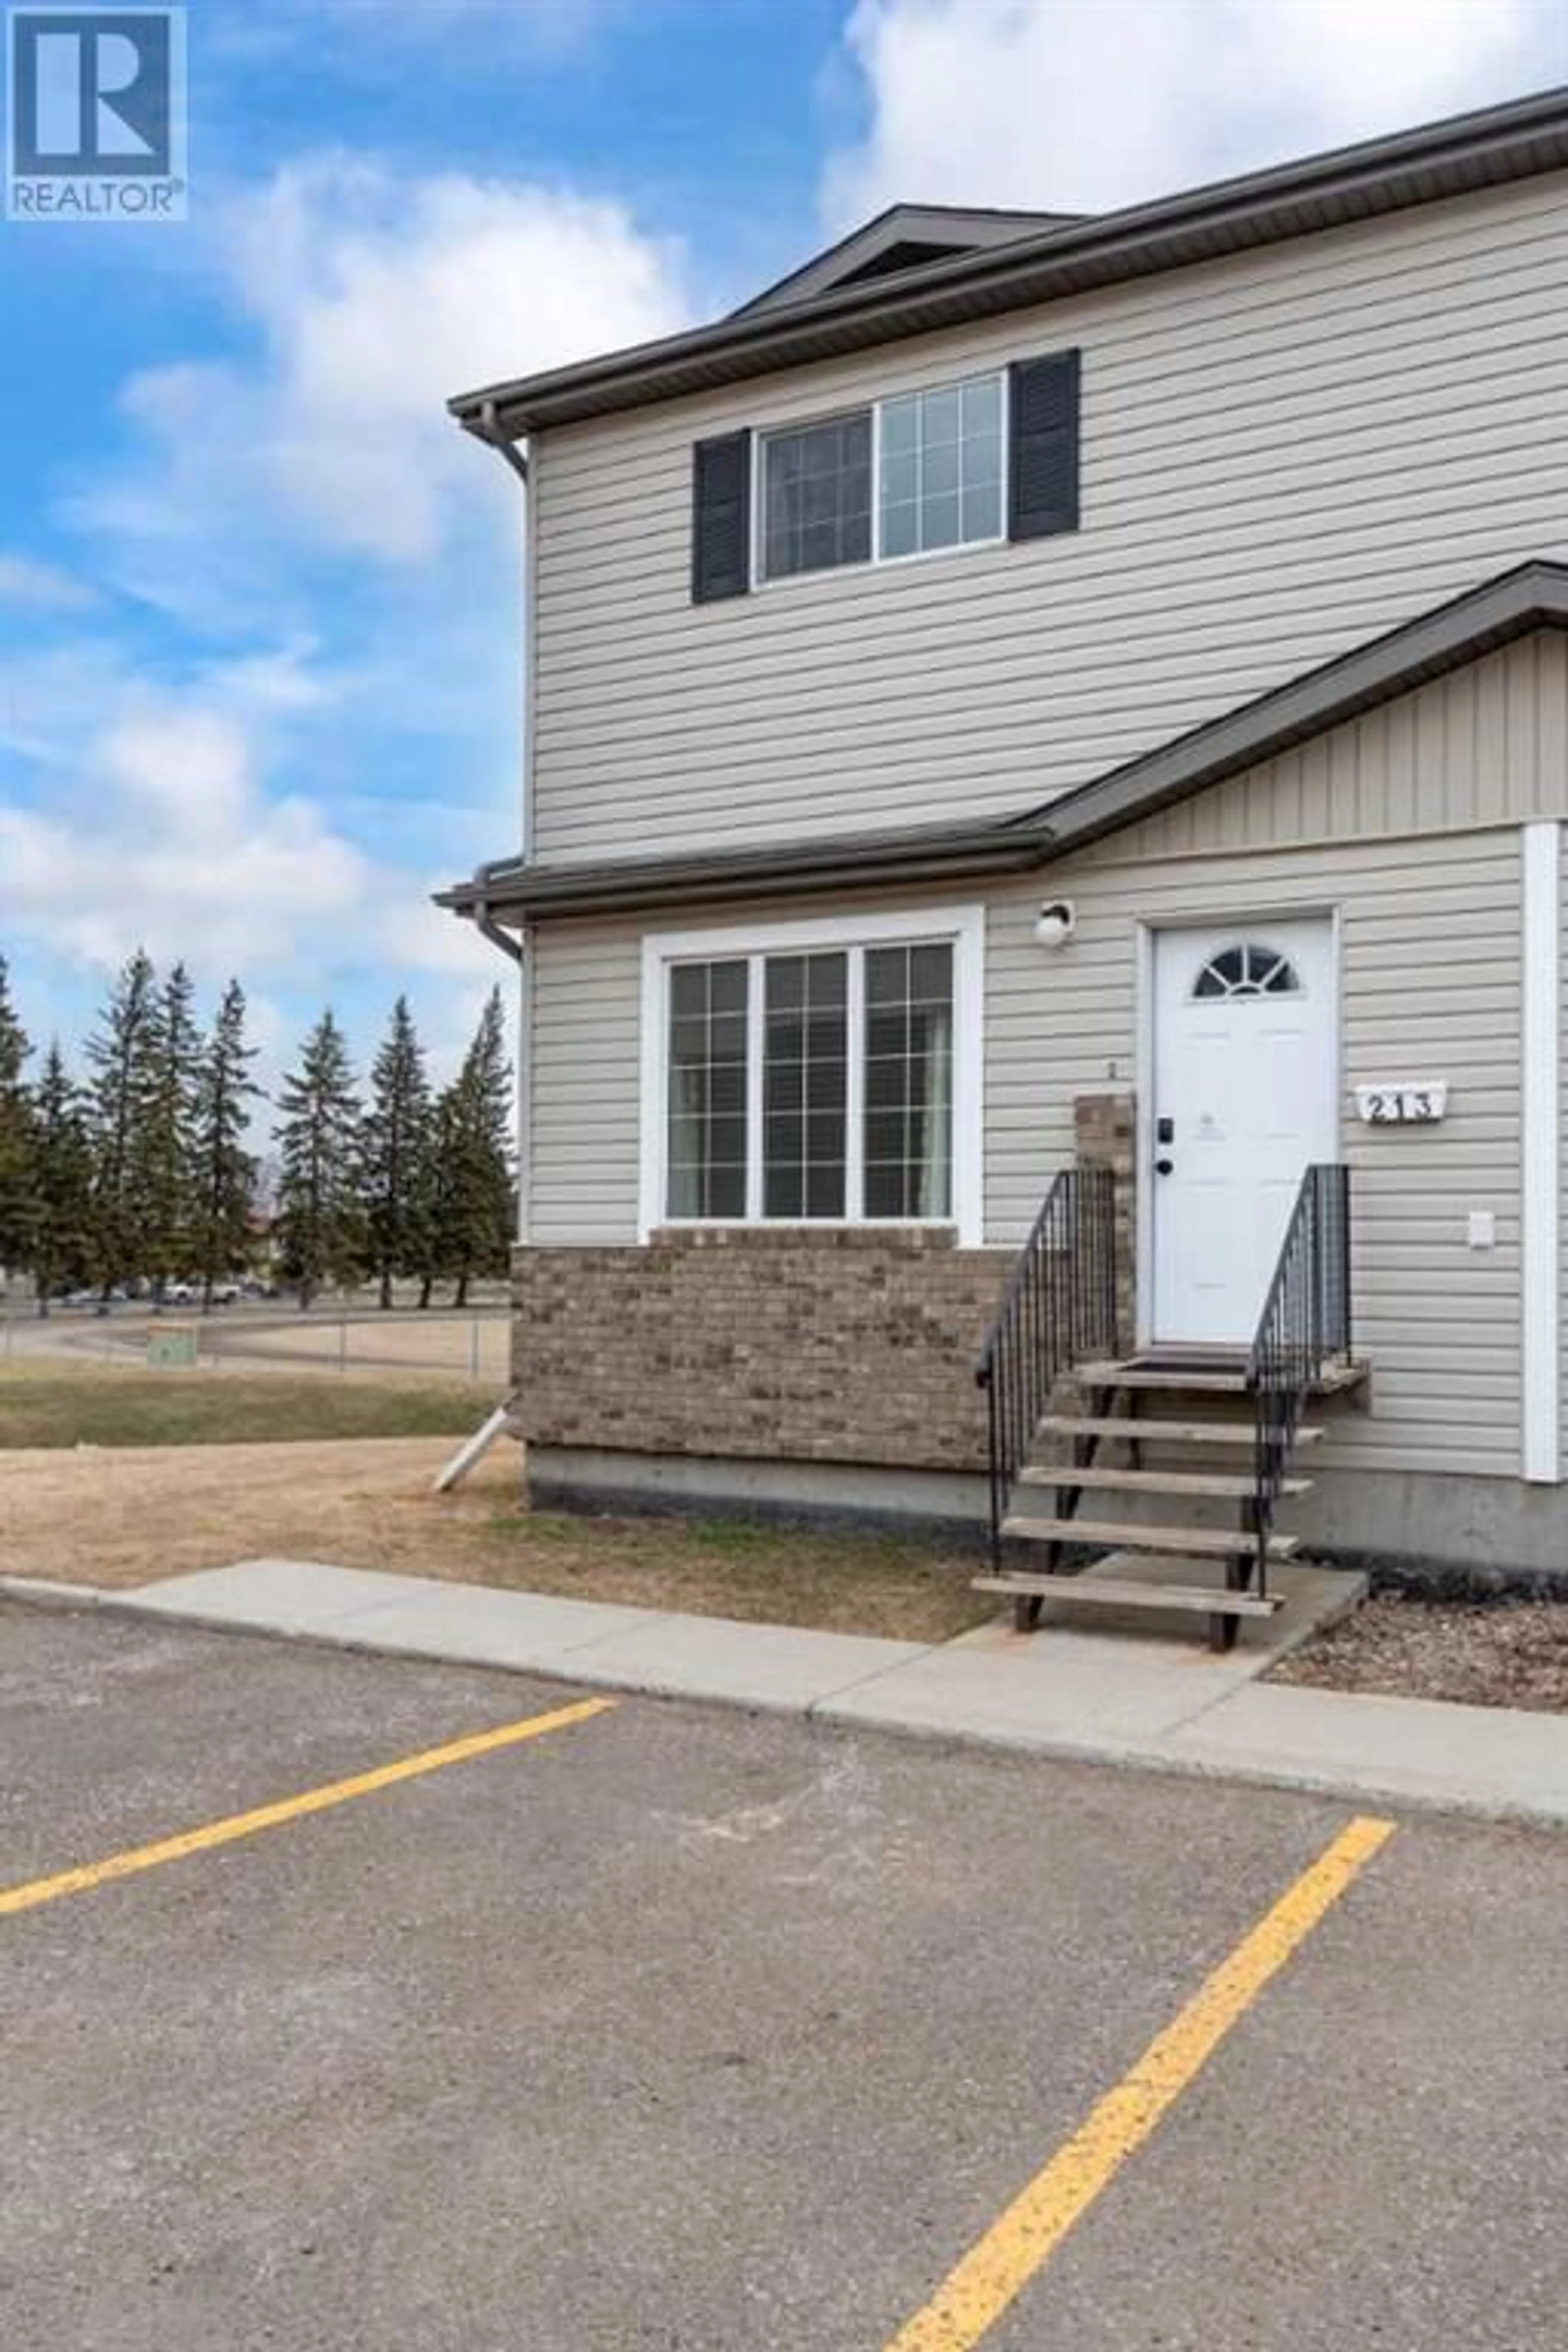 A pic from exterior of the house or condo for 213 4801 47 Avenue, Lloydminster Saskatchewan S9V0T9